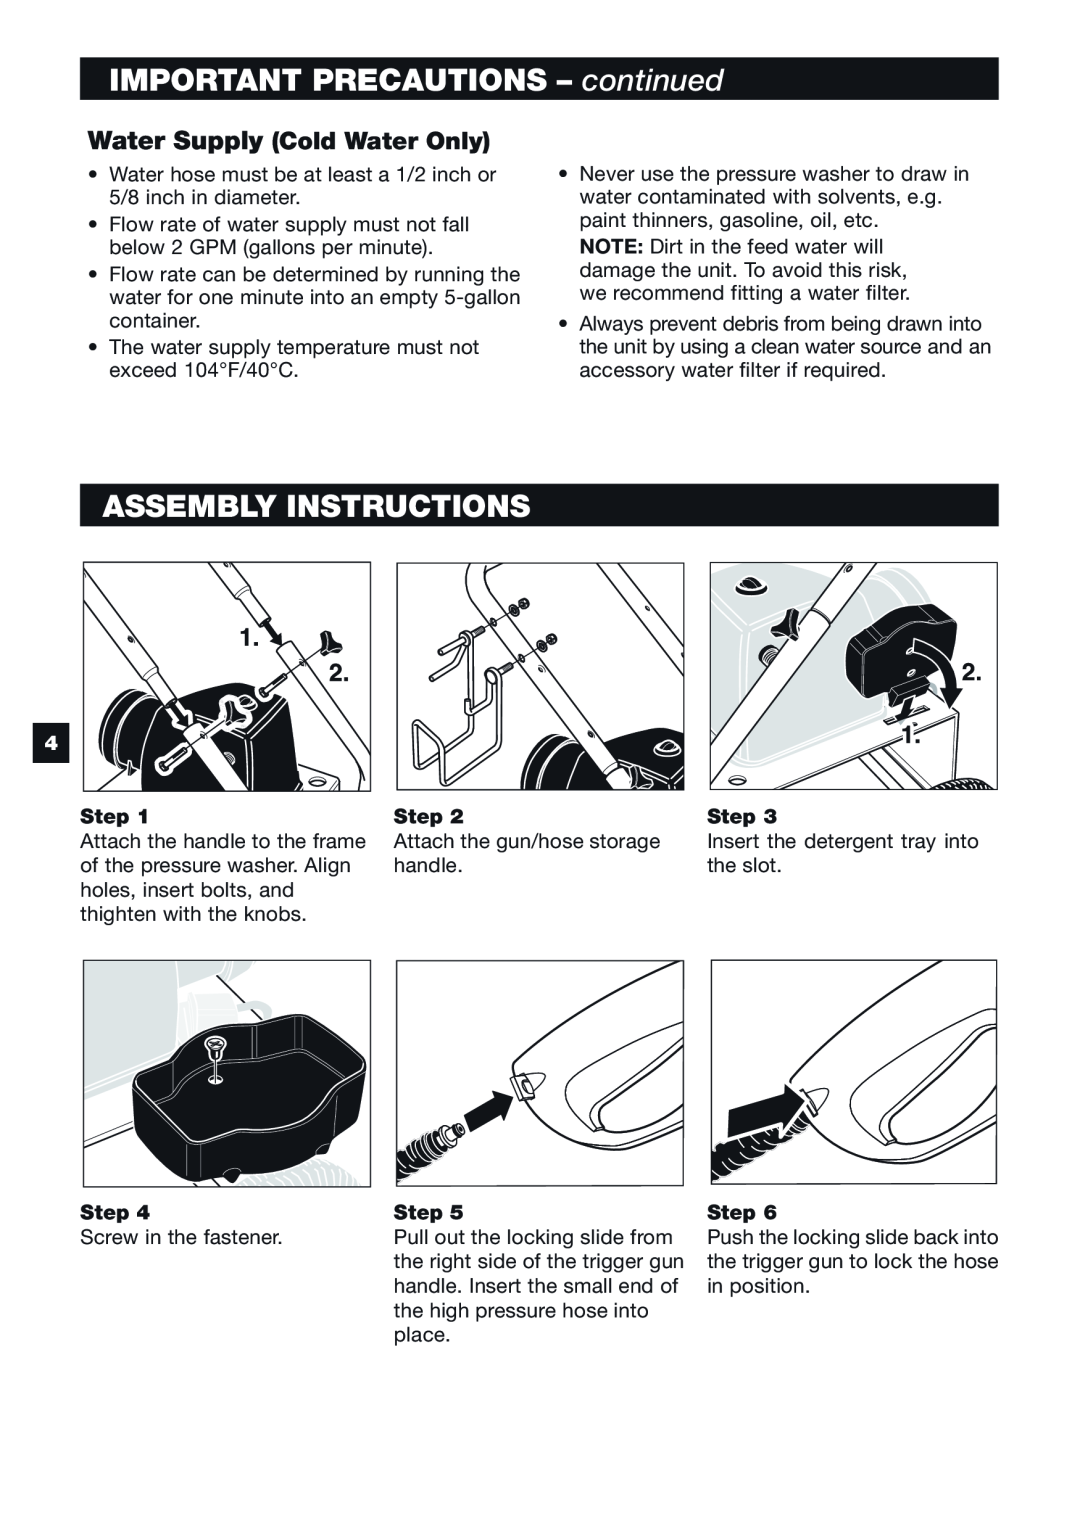 Karcher K 6.55 M IMPORTANT PRECAUTIONS - continued, Assembly Instructions, Water Supply Cold Water Only, Step 